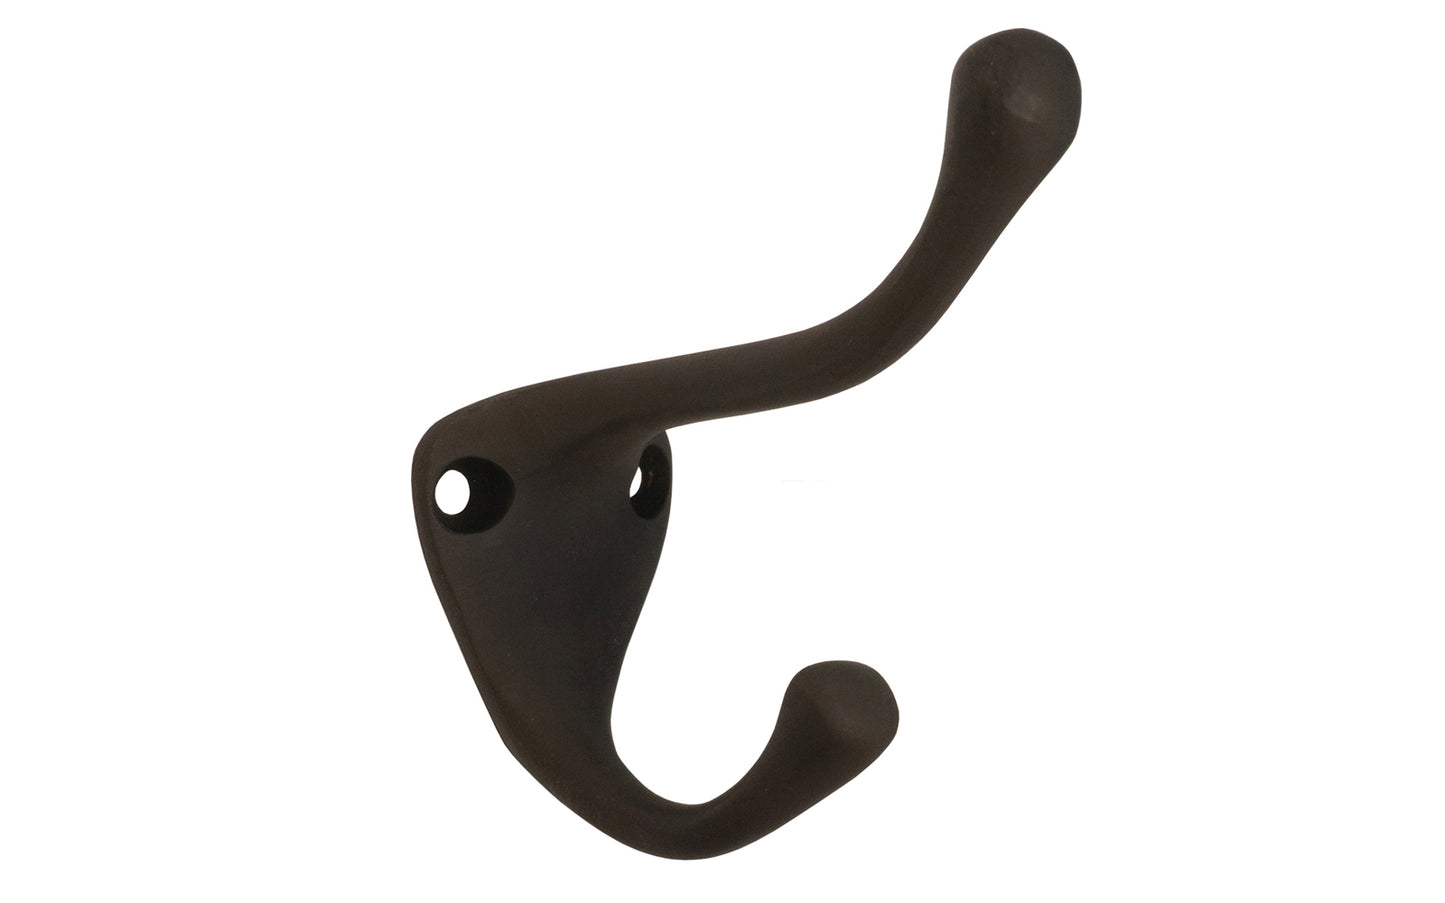 Ives Classic Solid Brass Double Hook. Great for kitchens, bathrooms, hallways, furniture, cabinets, bedrooms. The two prong hook is made of solid brass material, making it durable for clothing, towels, bags. Hat & Coat Hook. Oil Rubbed Bronze Finish.